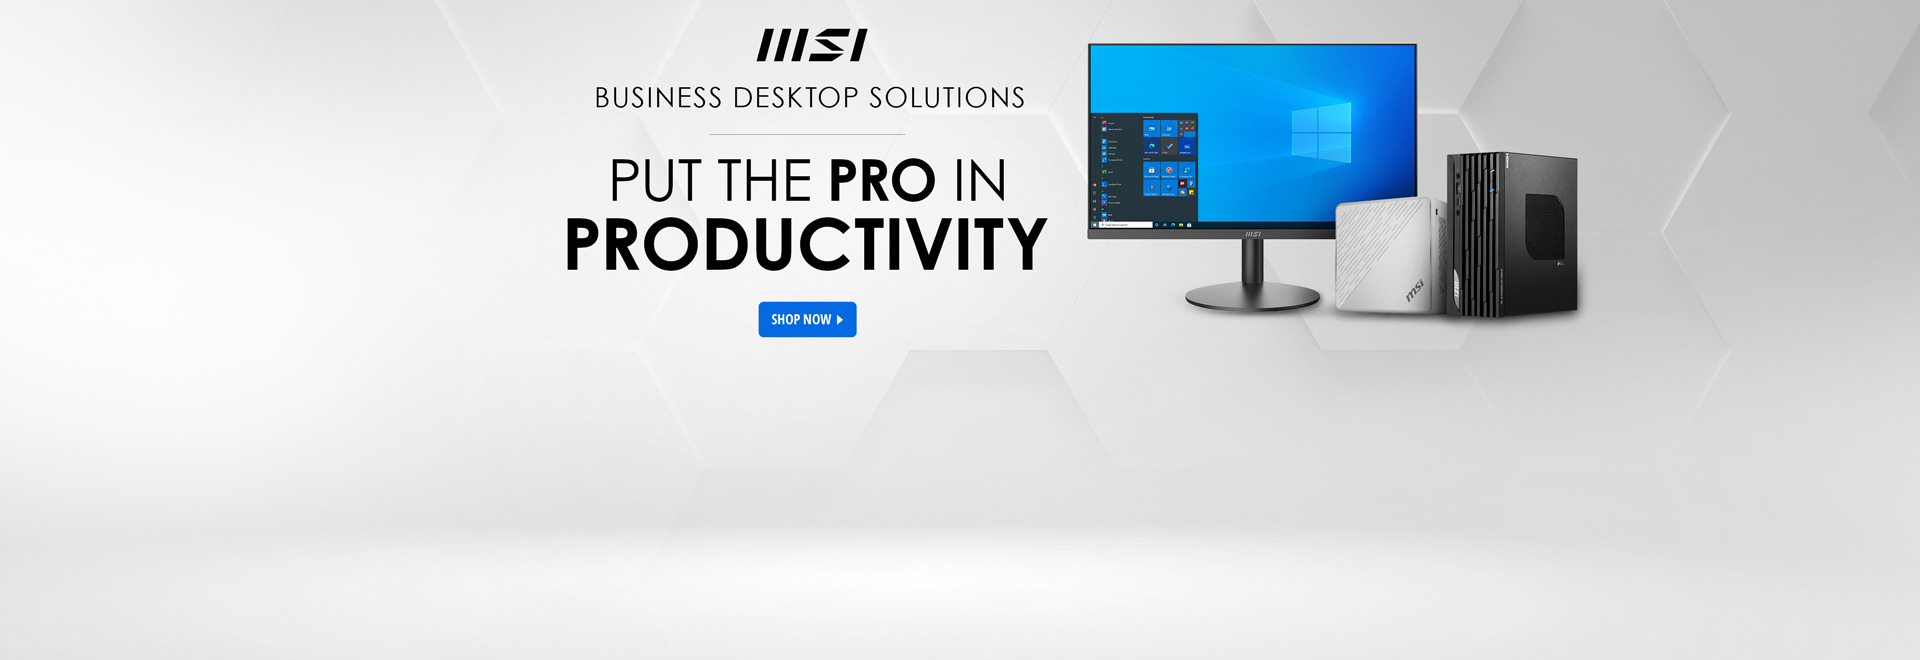 Put the pro in productivity